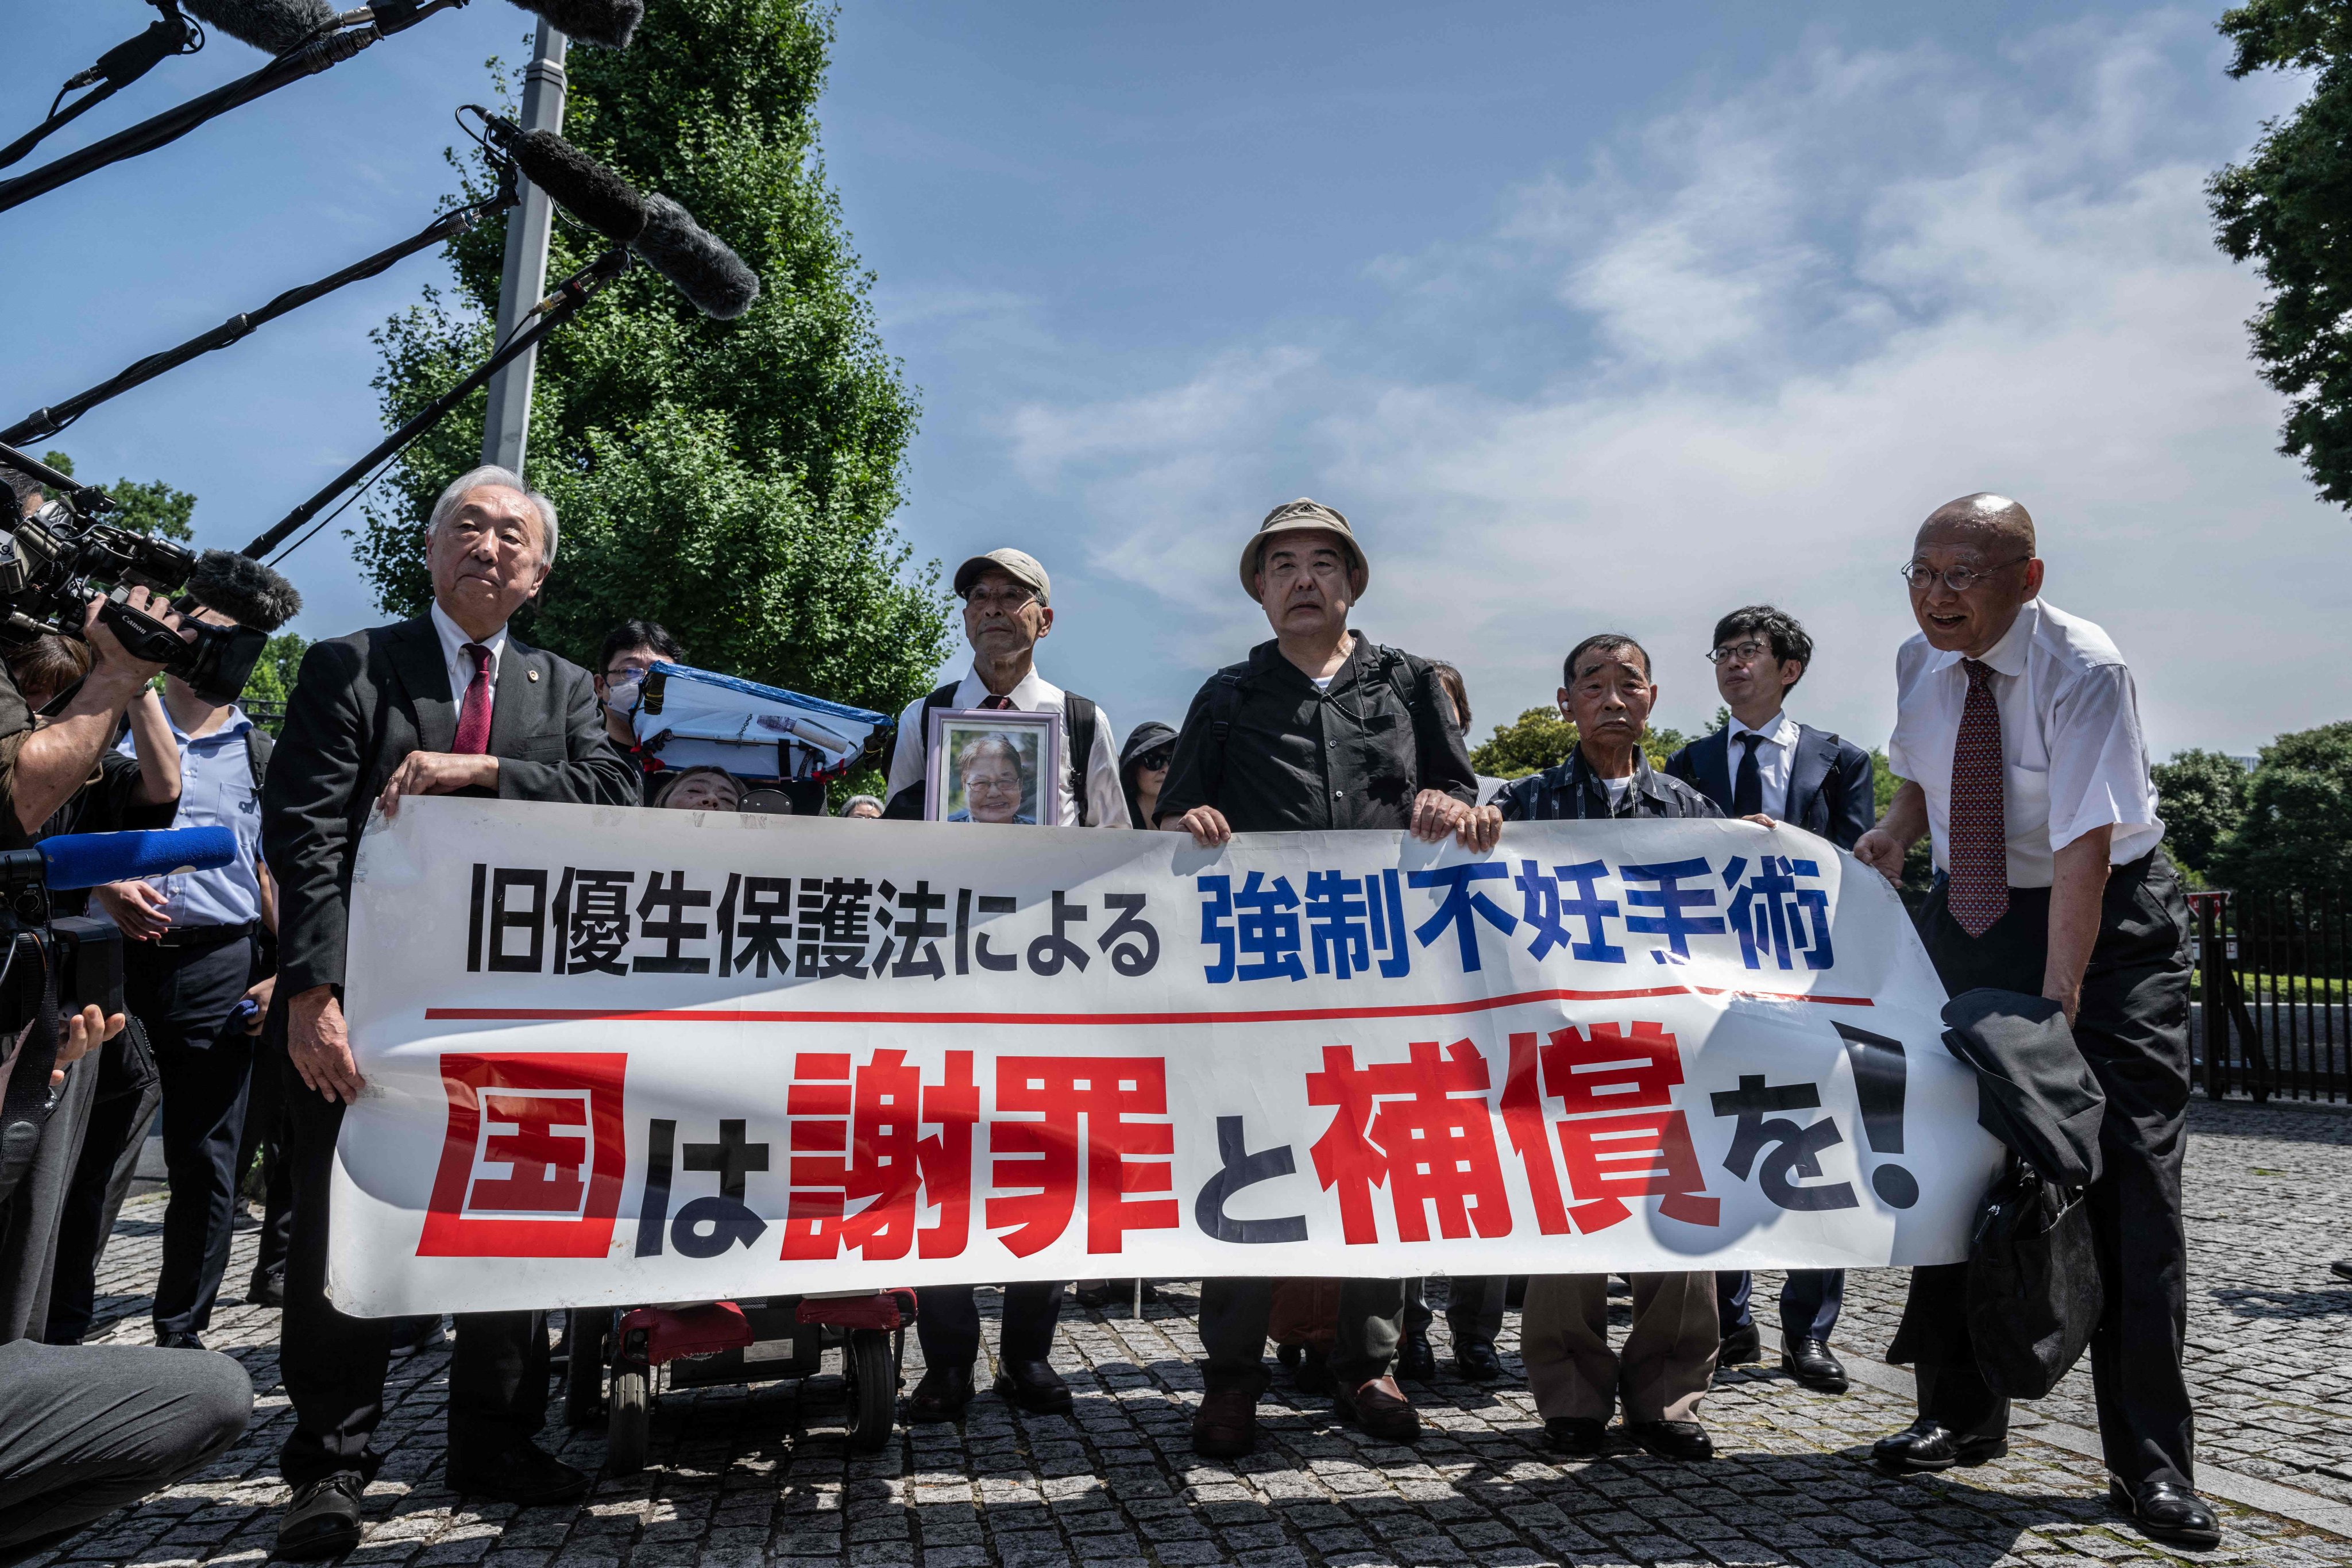 Lawyers and supporters of victims of forced sterilisation under a now-defunct eugenics law, carry a banner demanding apologies and compensations in Tokyo on Wednesday. Photo: AFP